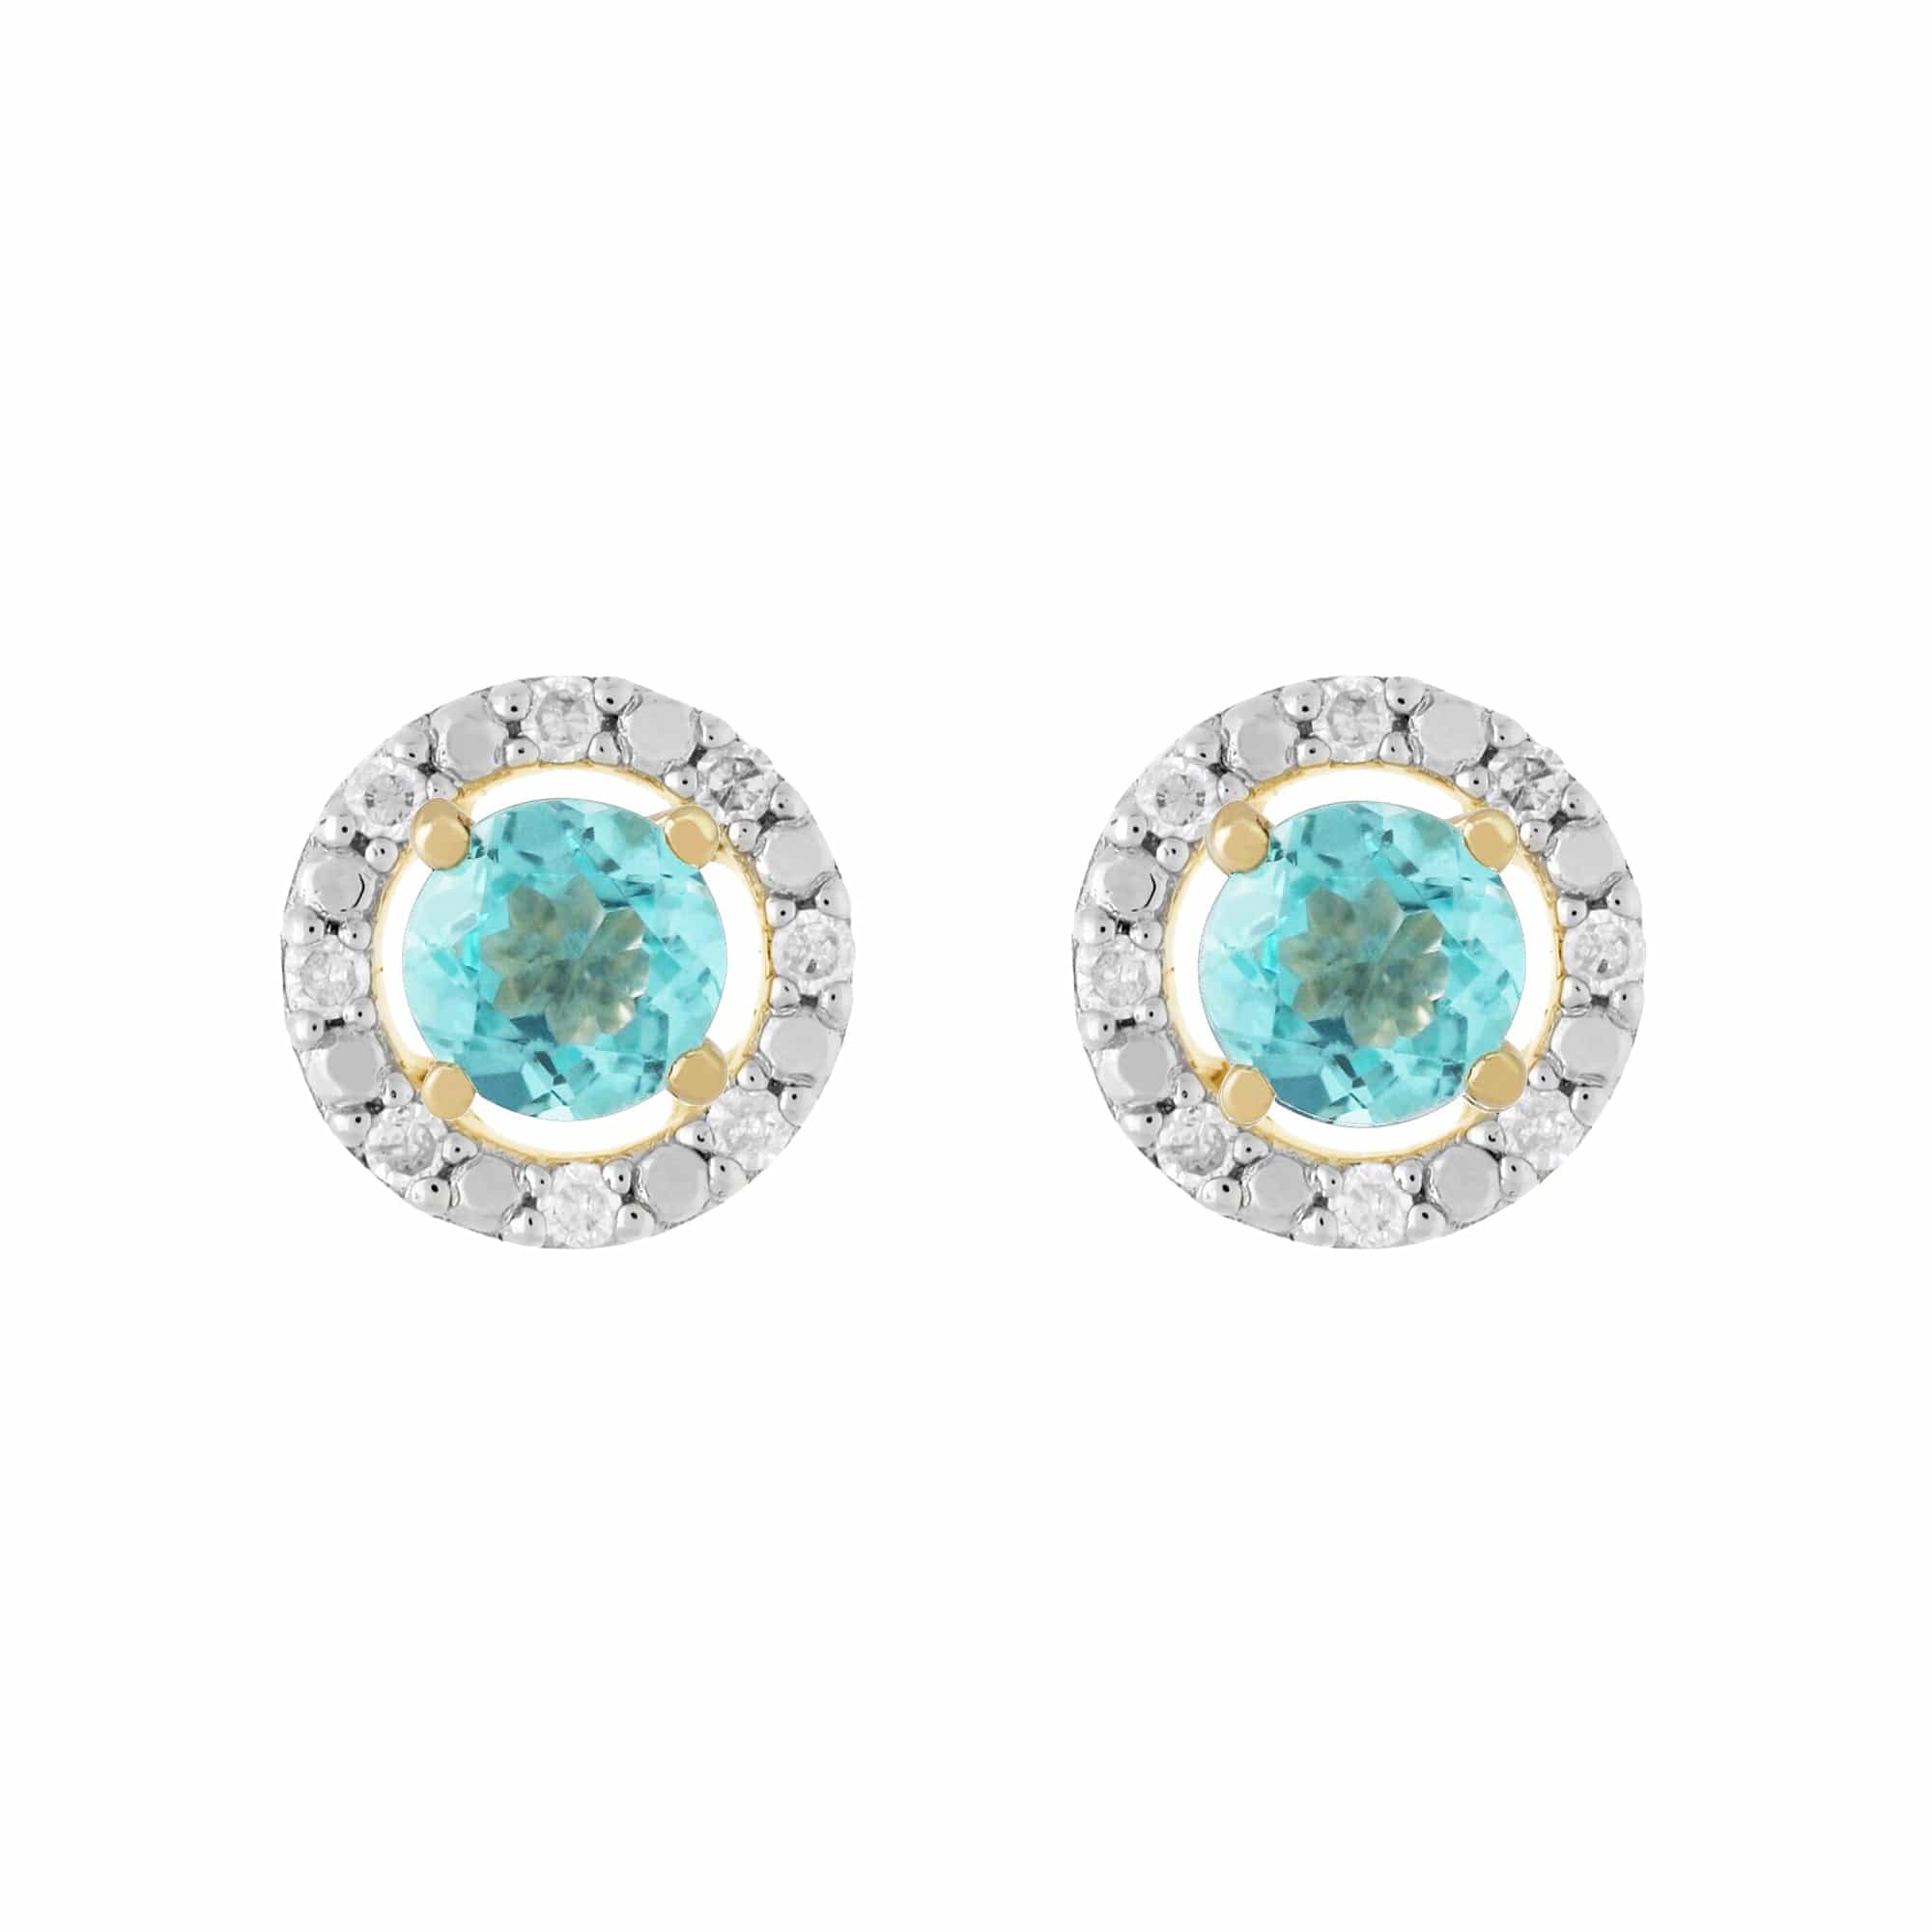 183E0083439-191E0376019 Classic Round Apatite Stud Earrings with Detachable Diamond Round Earrings Jacket Set in 9ct Yellow Gold 1